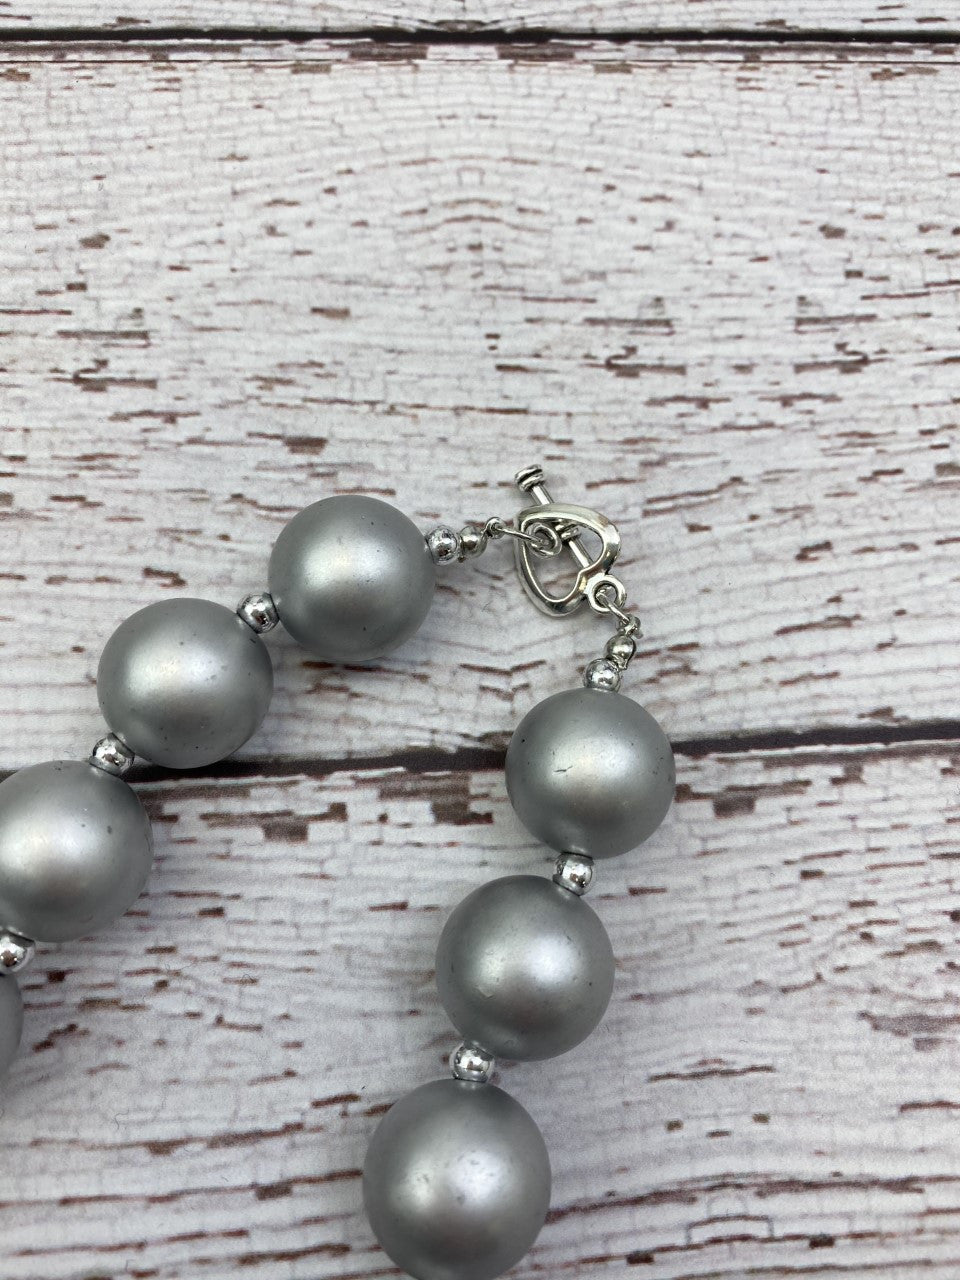 Silver chunky bead necklace has a toggle closure.